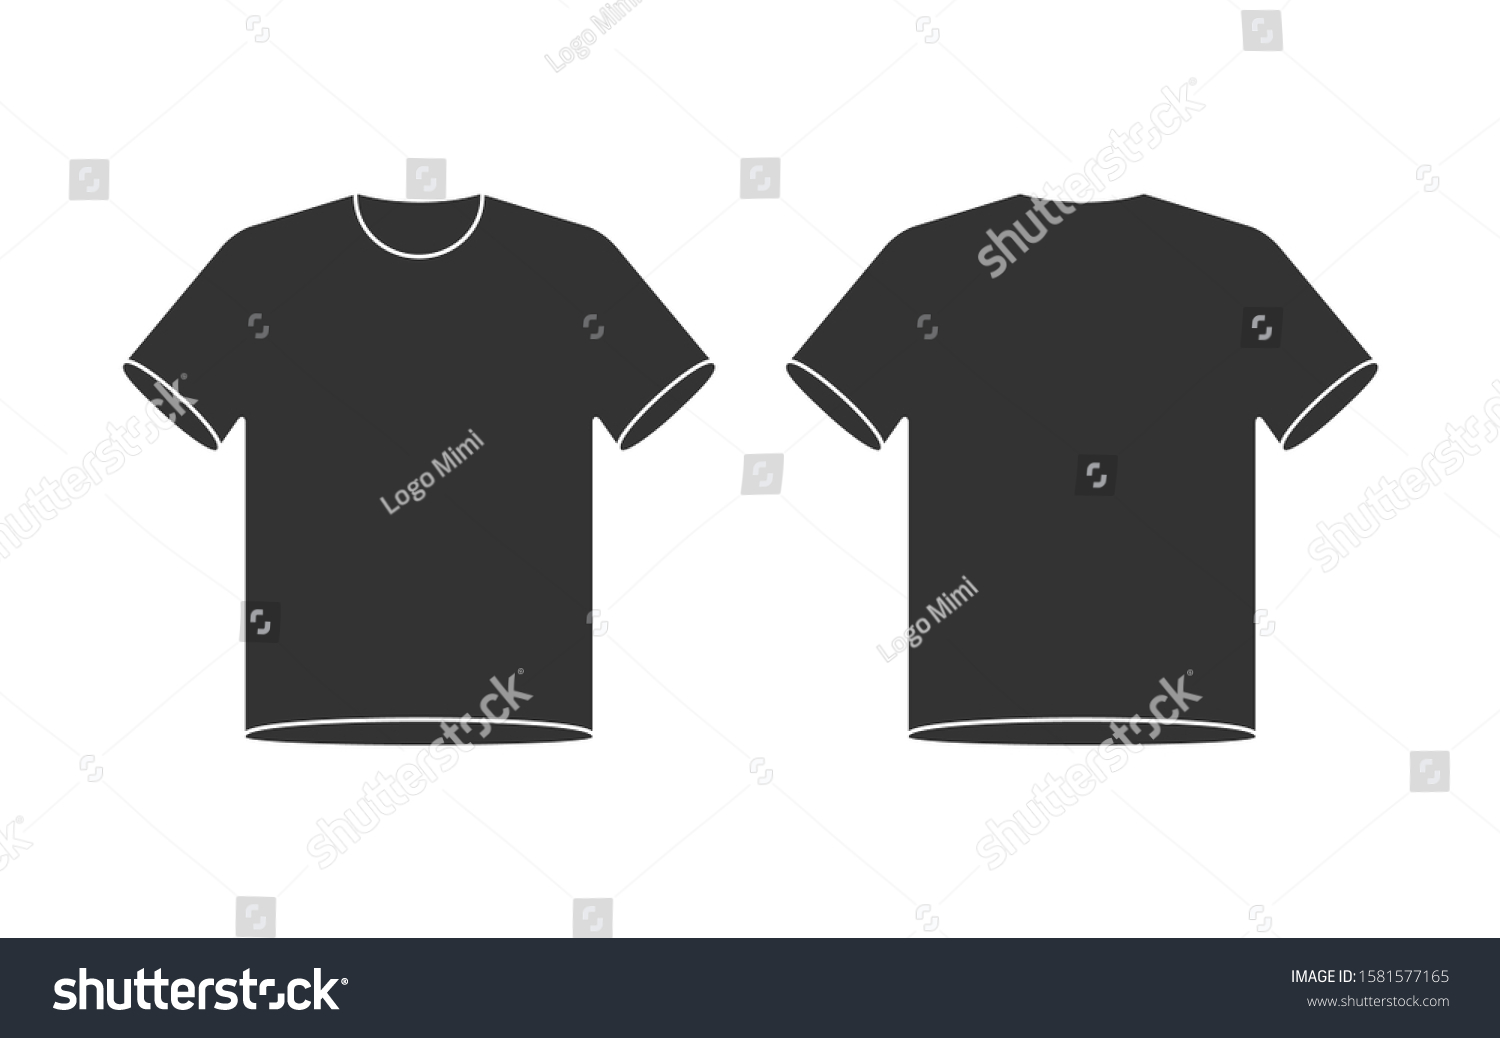 Download 37+ Blank T Shirt Mockup Front And Back Background Yellowimages - Free PSD Mockup Templates